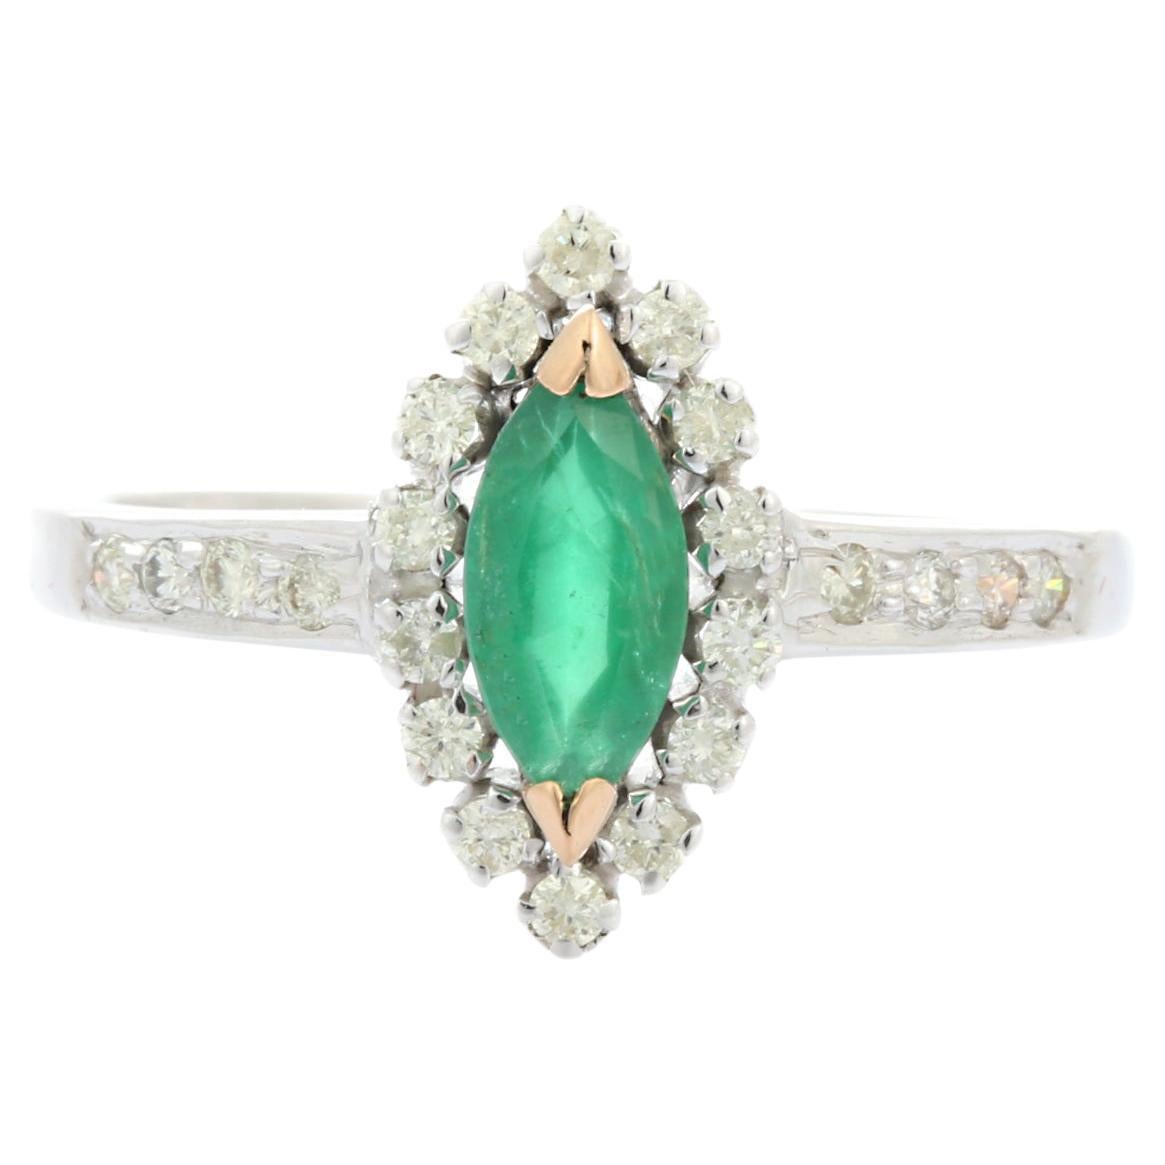 Marquise Shaped Emerald and Diamond Ring in 14K White Gold